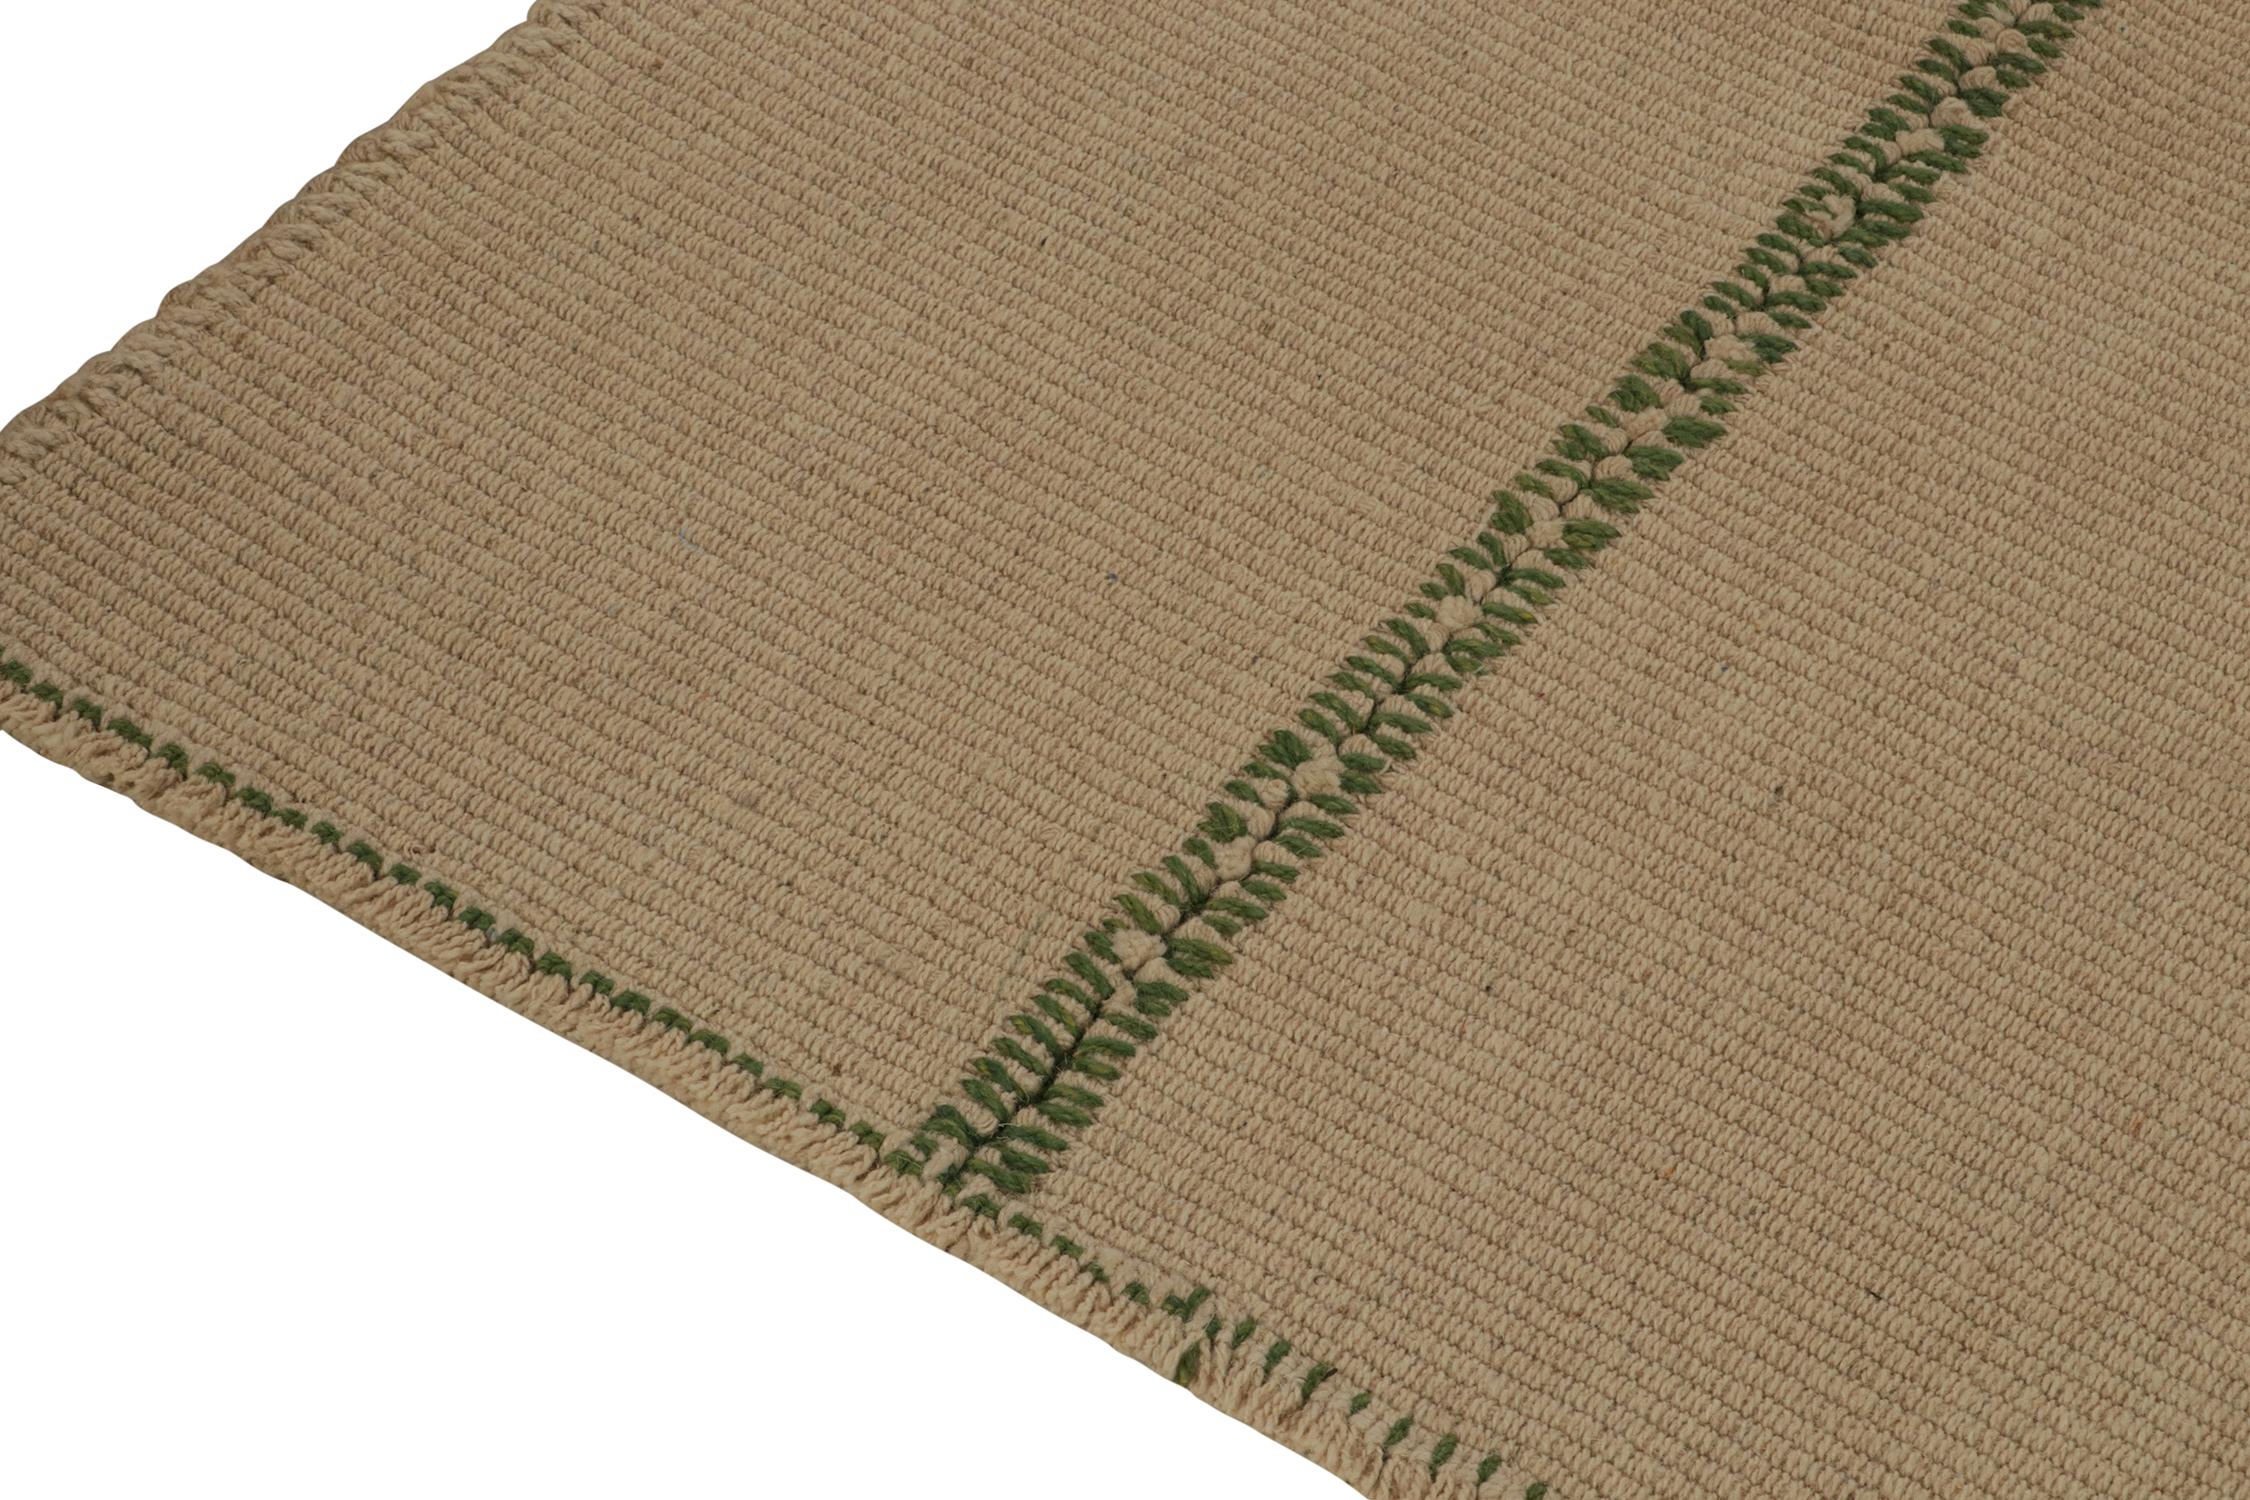 Hand-Knotted Rug & Kilim’s Contemporary Kilim in Beige-Brown with Green Accents For Sale